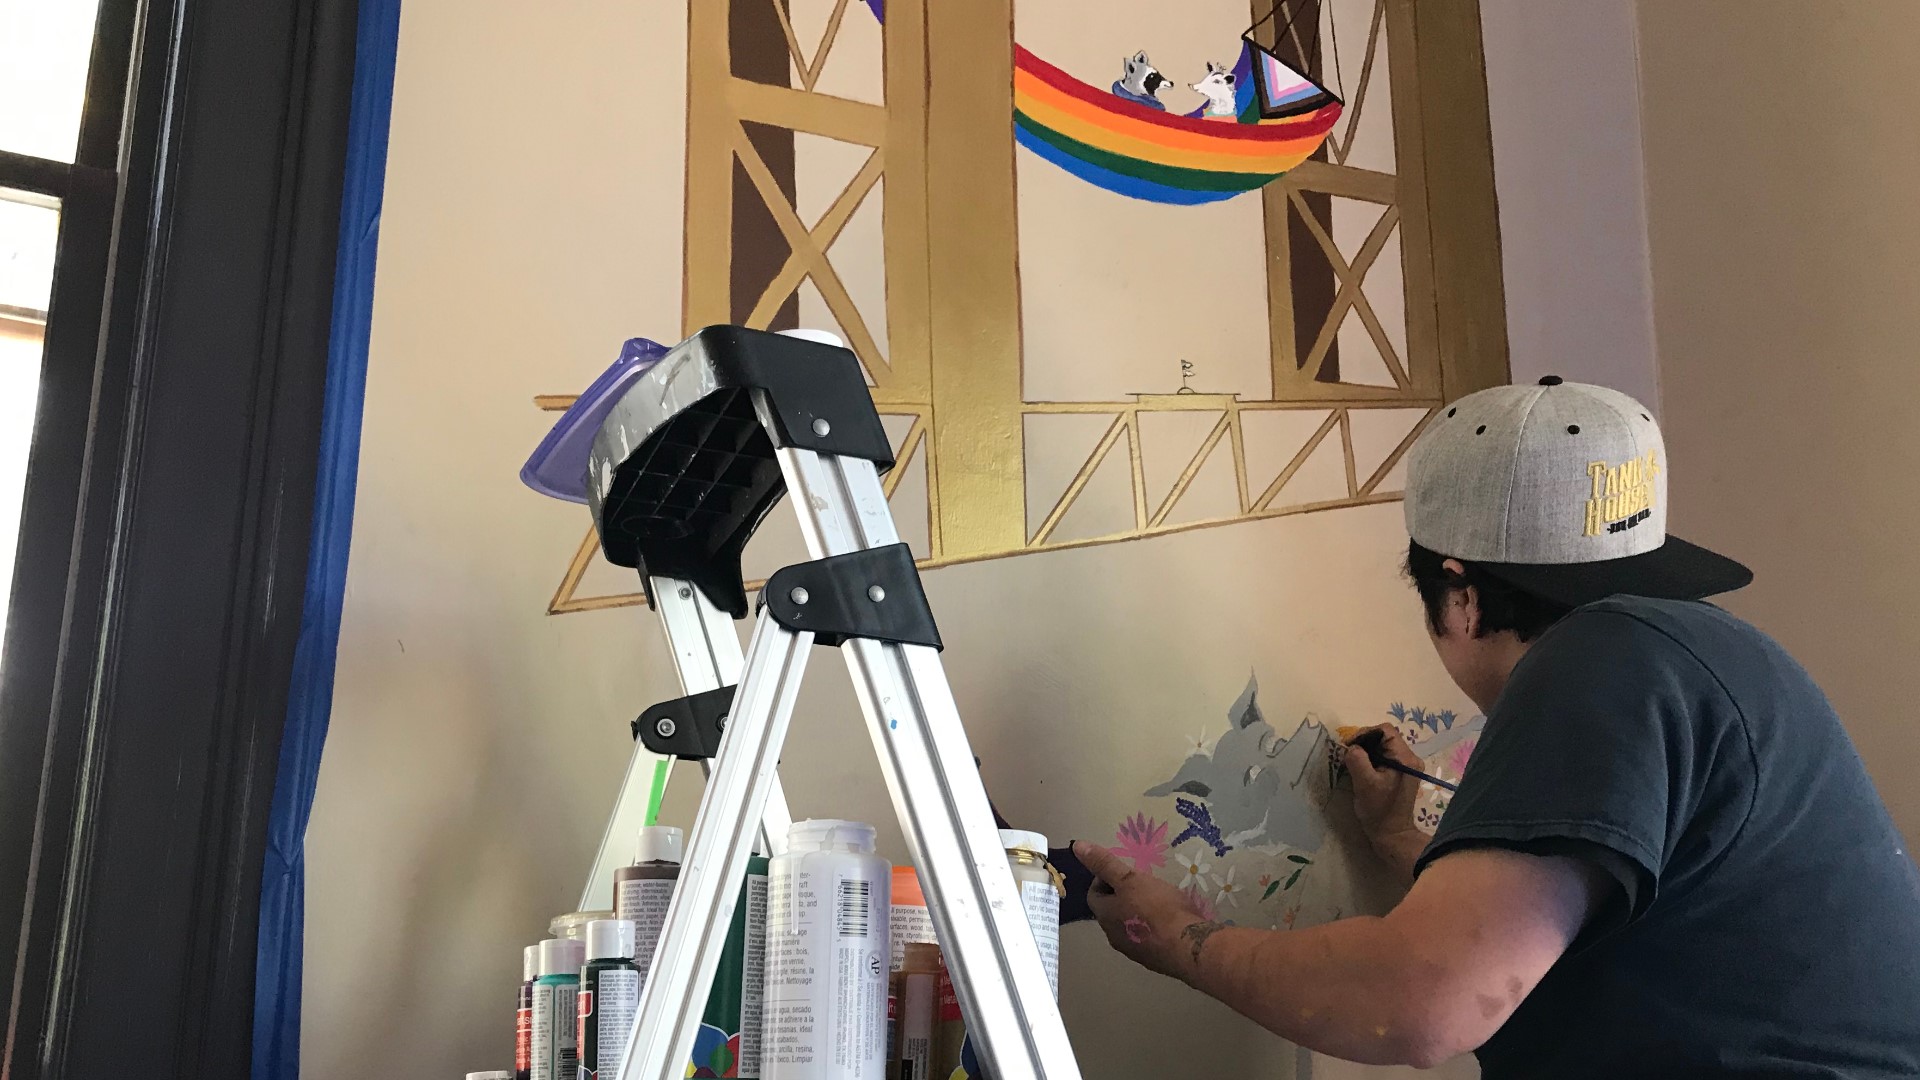 Employees with the Sacramento LGBT Center say they're just a couple weeks away from opening the Short-term Transitional Emergency Program Shelter in Midtown. It will serve youth in the community who find themselves facing homelessness.